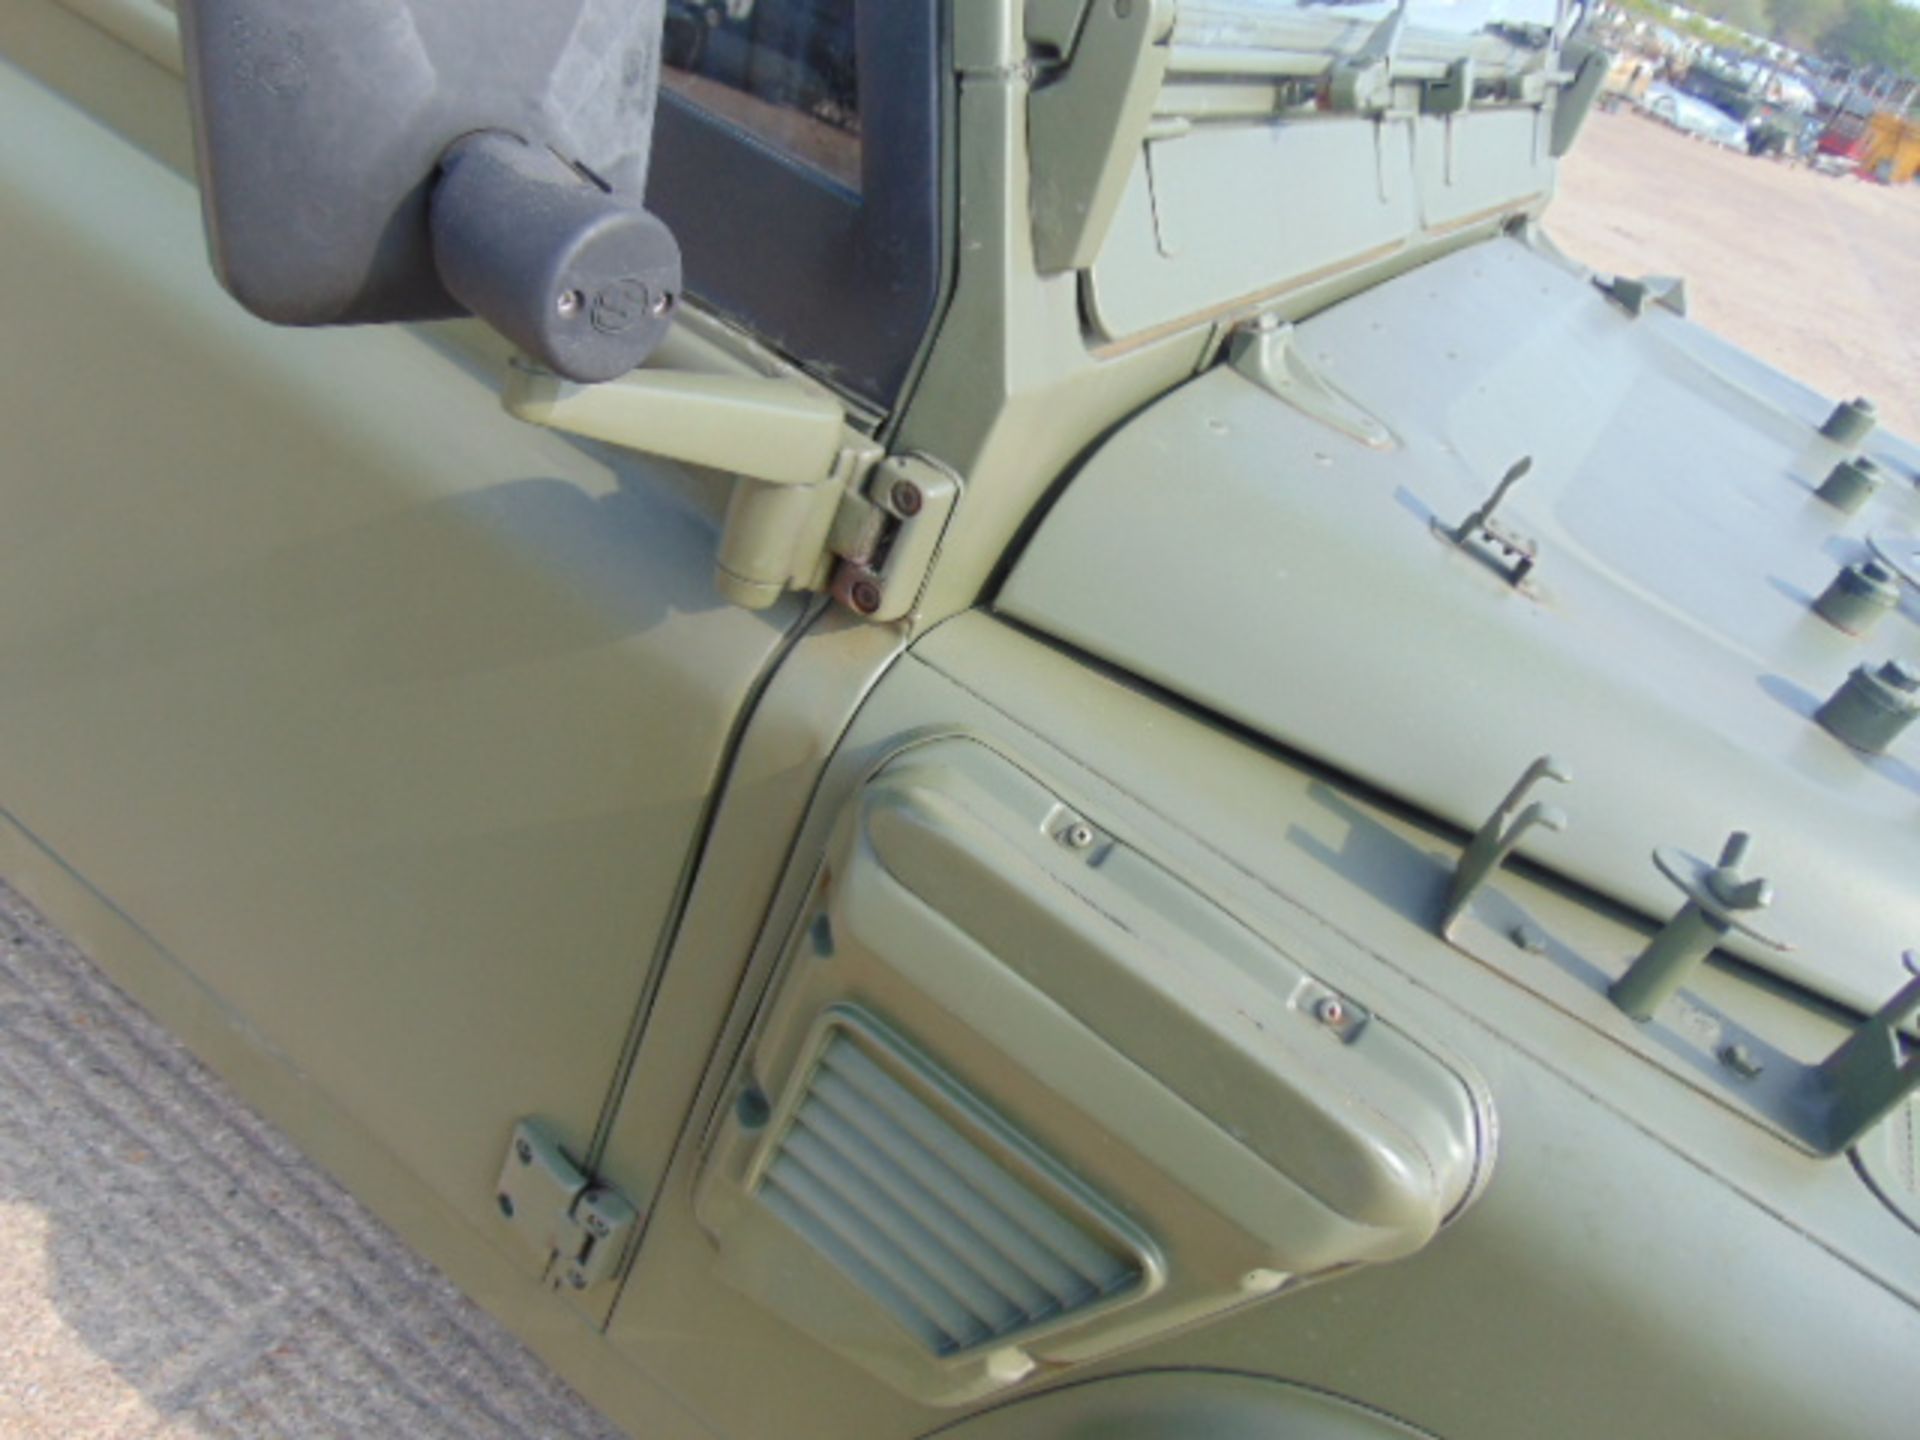 Military Specification Land Rover Wolf 90 Soft Top - Image 19 of 26